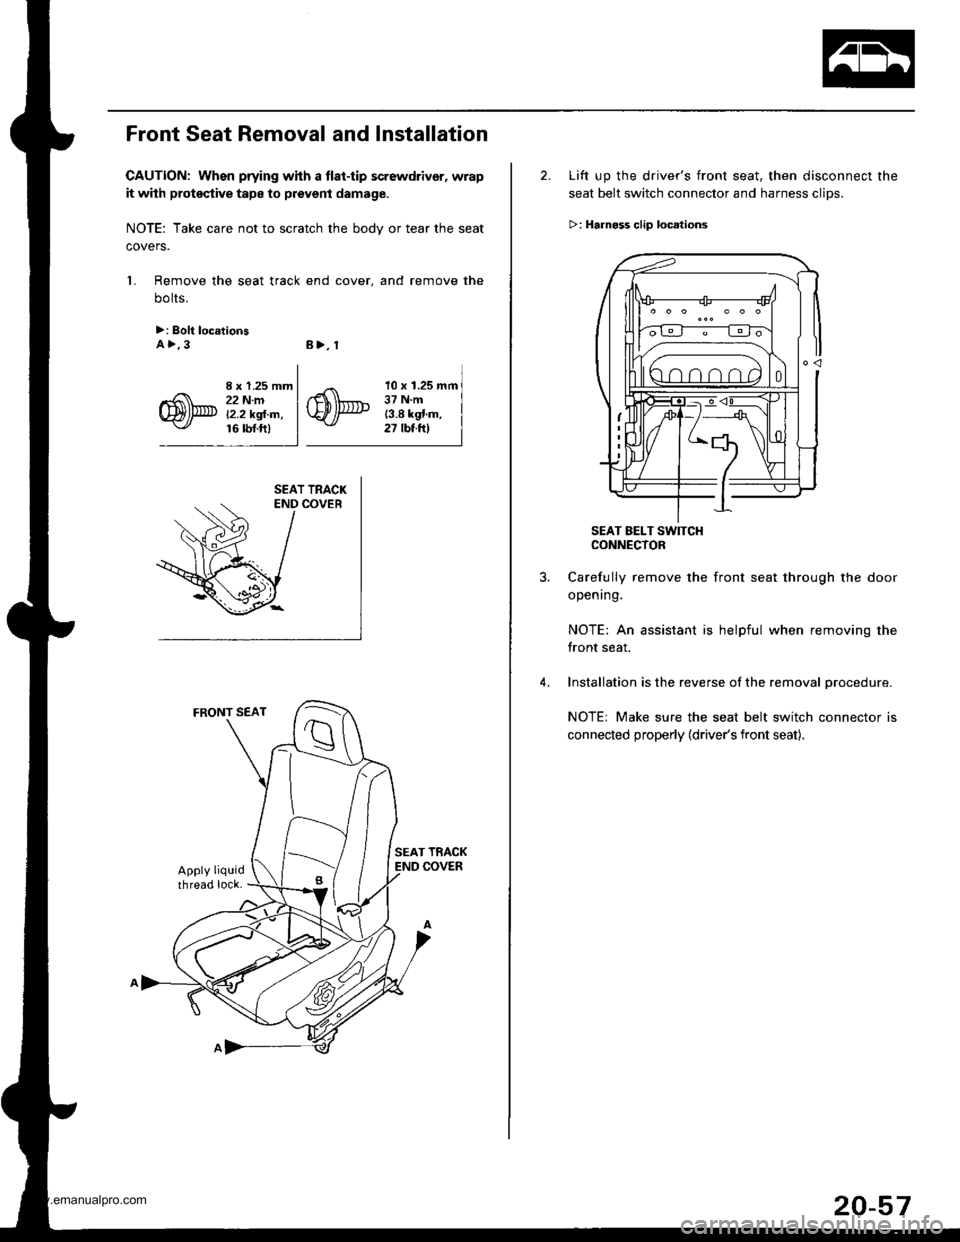 HONDA CR-V 1998 RD1-RD3 / 1.G Service Manual 
Front Seat Removal and Installation
CAUTION: When prying whh a tlat-tip screwdrivor, wrap
it with proteqtive tape to prevent damage.
NOTE: Take care not to scratch the bodv or tear the seat
covers.
1